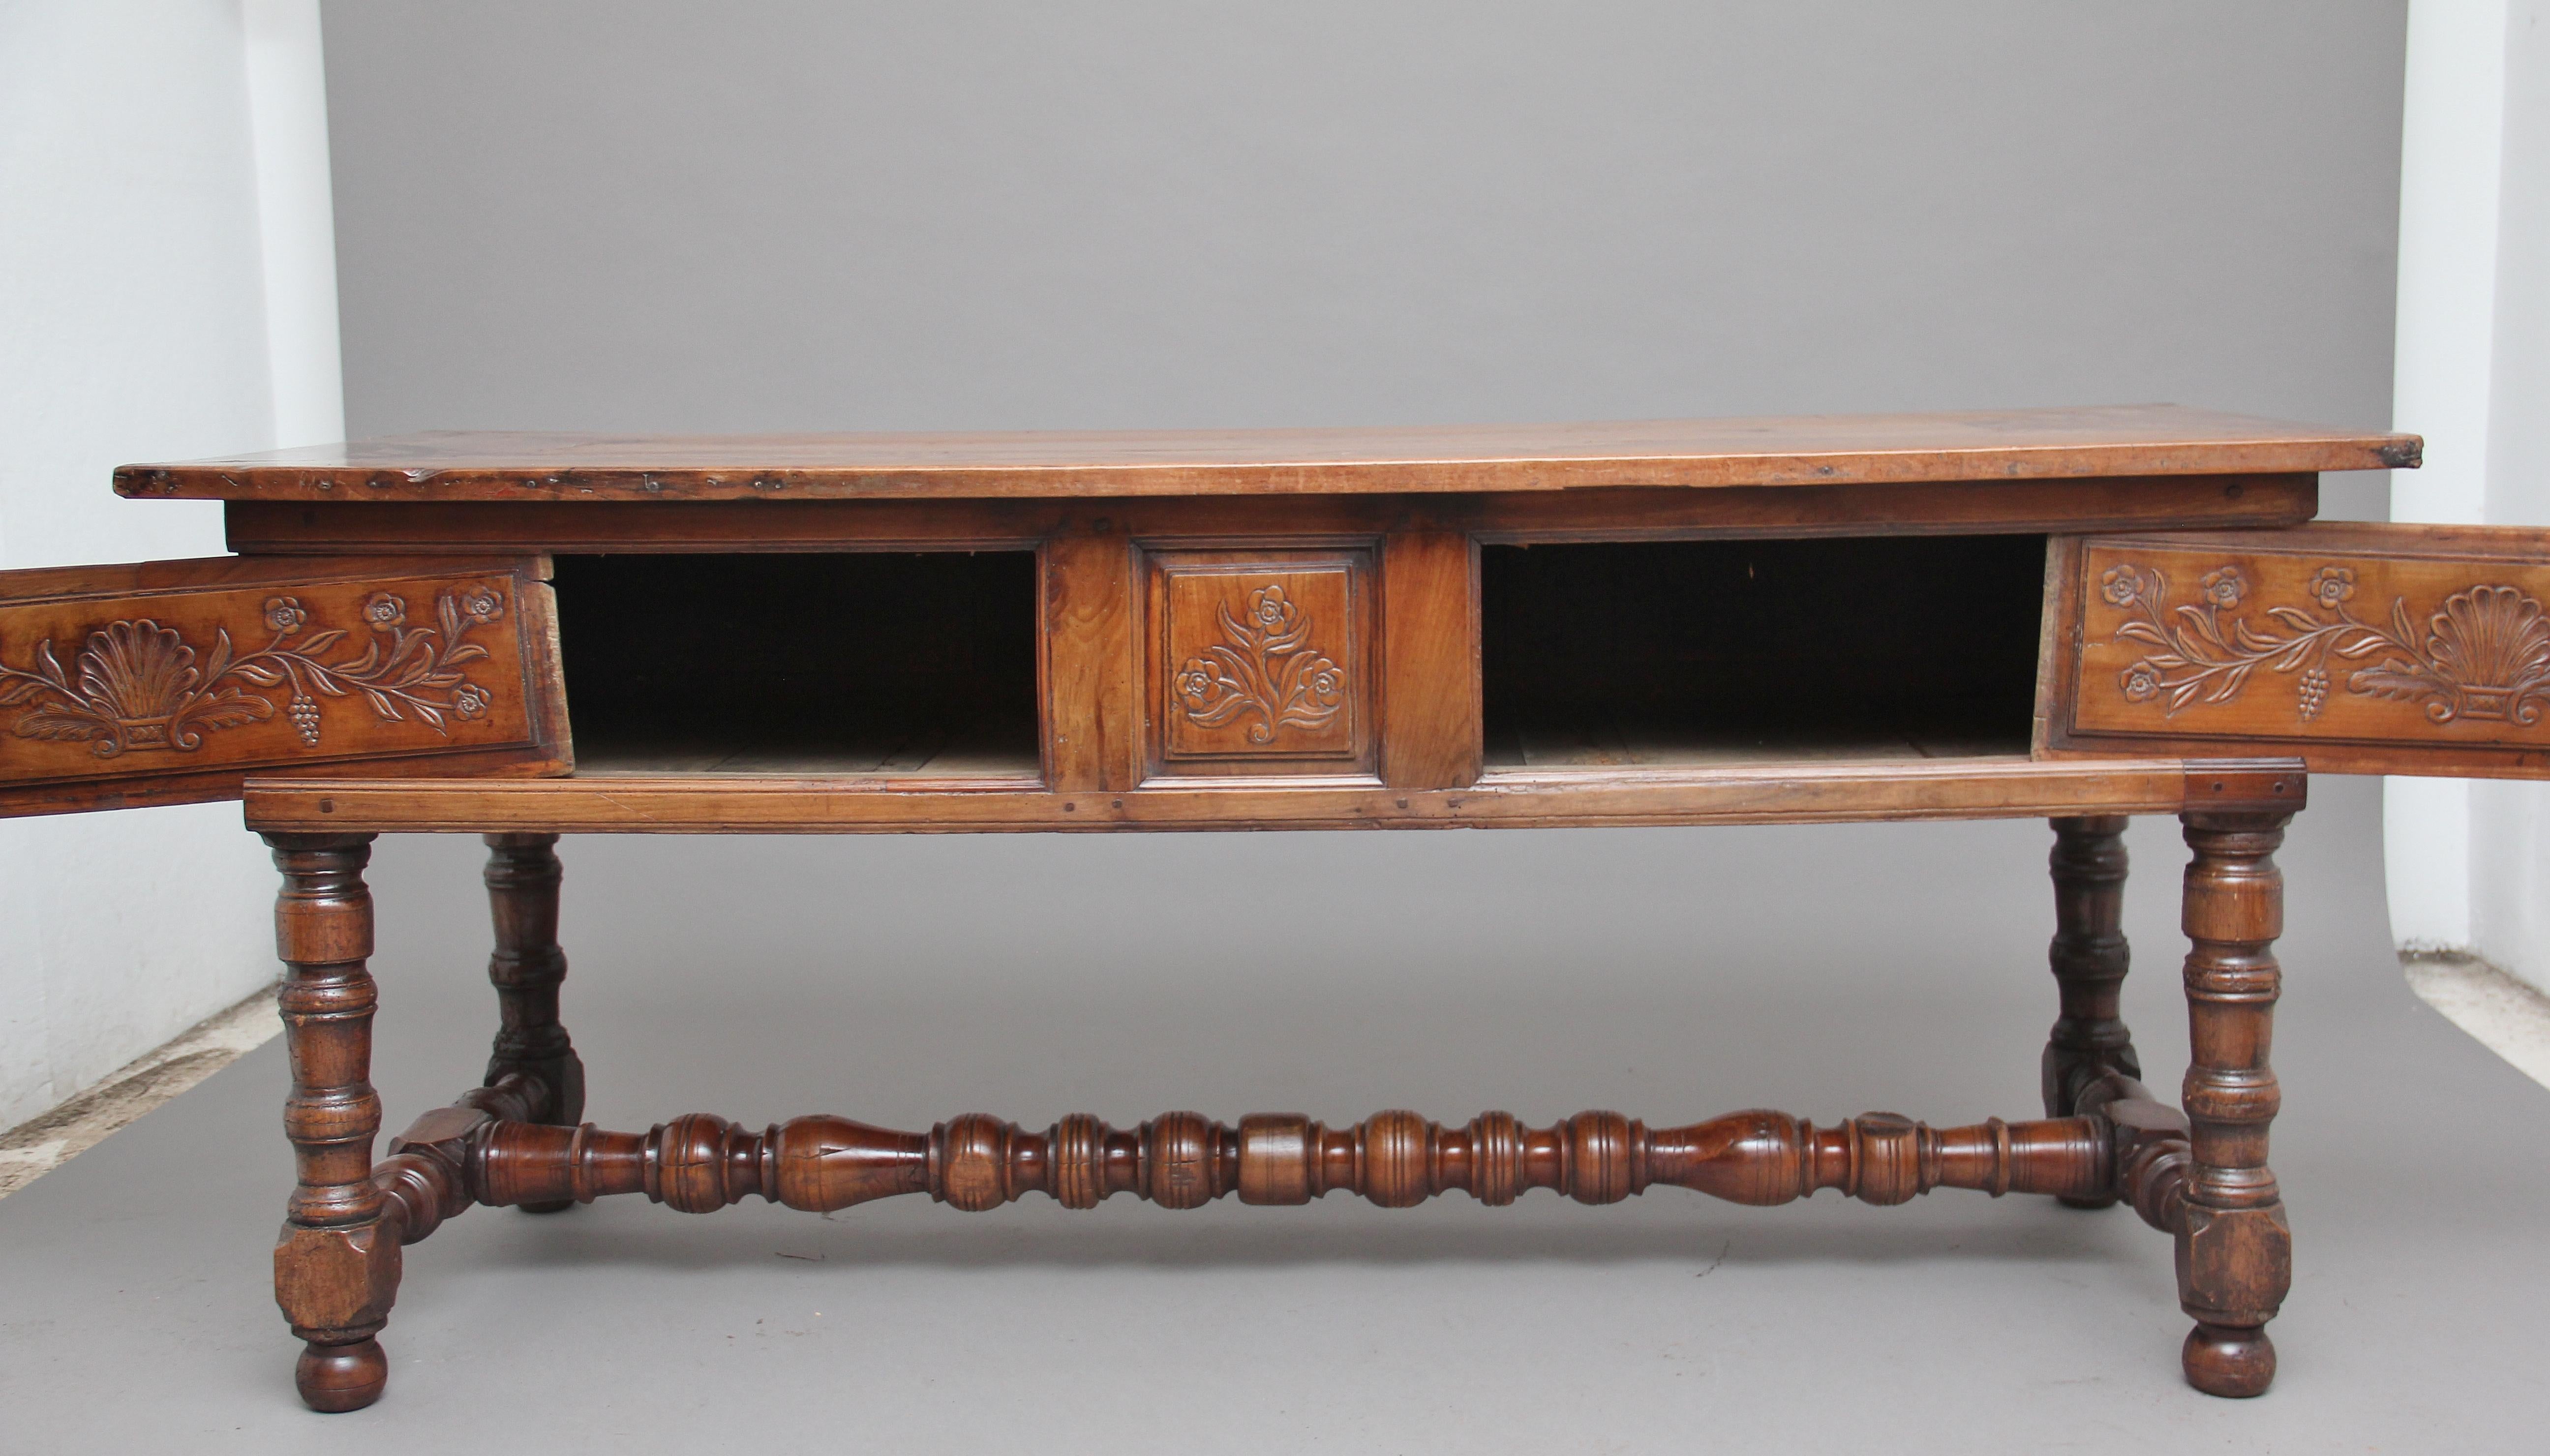 18th century French fruitwood serving / side table, having a nice figured top bursting with character, with two slide carved panels below opening to reveal cupboard space, the panels having carved floral and shell decoration, with a fixed central